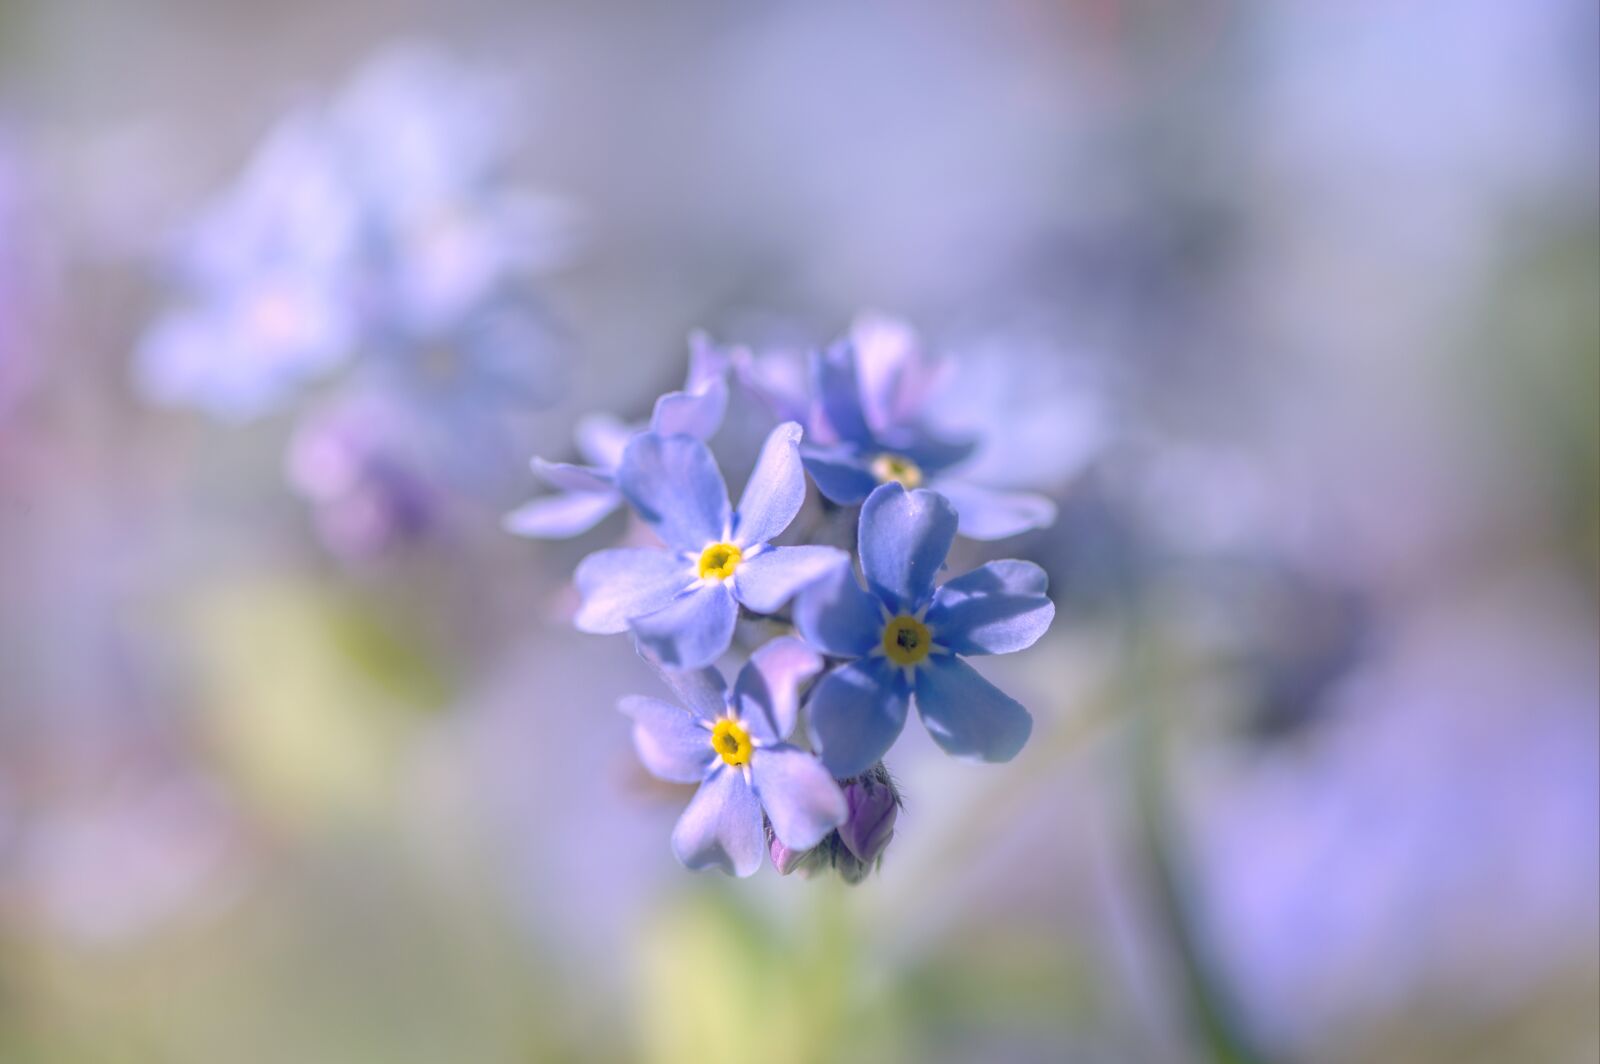 Nikon Z6 sample photo. Forget me not, flower photography